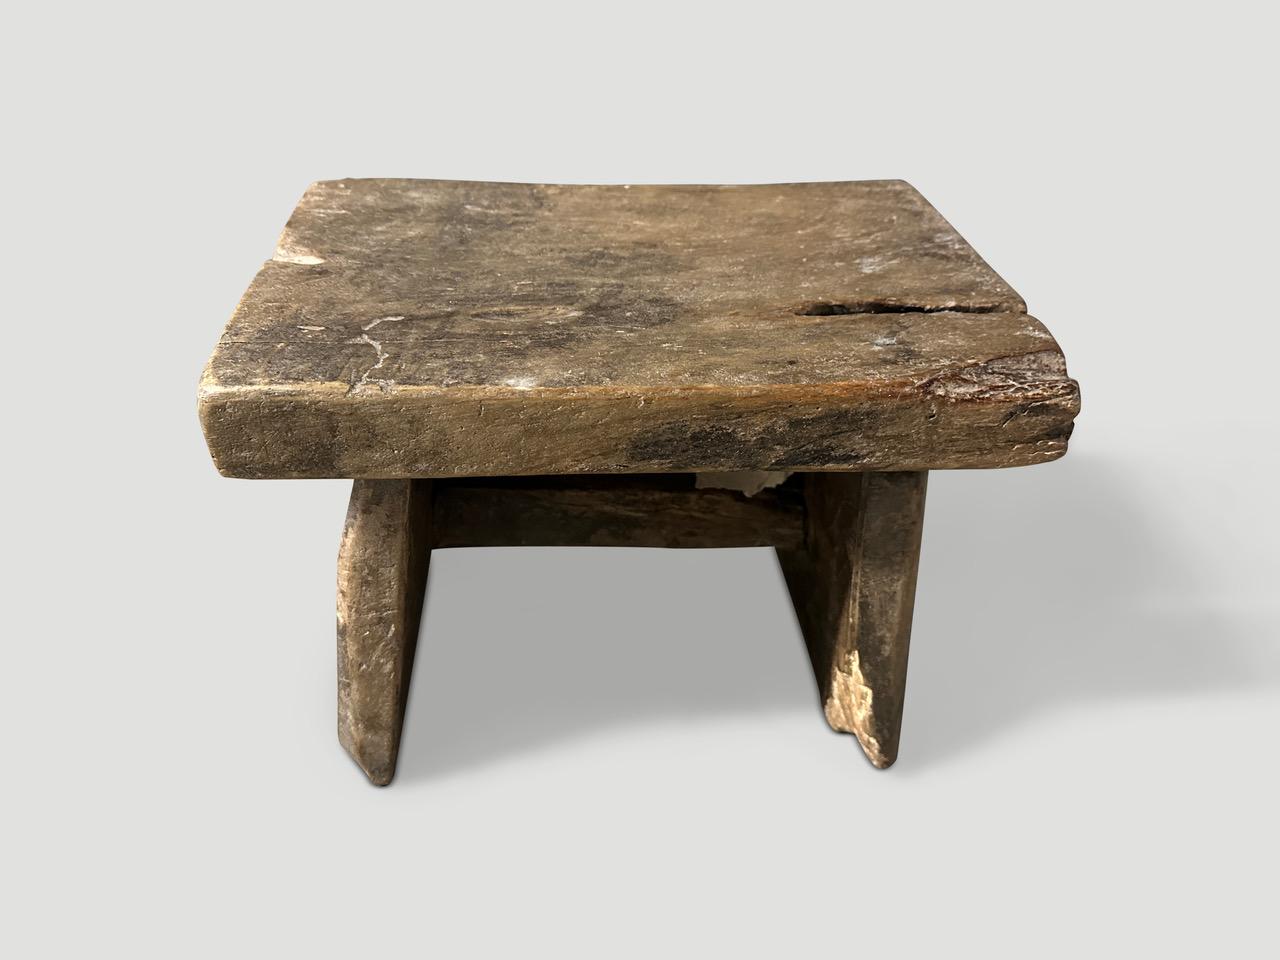 Antique hand made side table or stool. Celebrating the cracks and crevices and all the other marks that time and loving use have left behind. Circa 1950.

This side table or stool was hand made in the spirit of Wabi-Sabi, a Japanese philosophy that